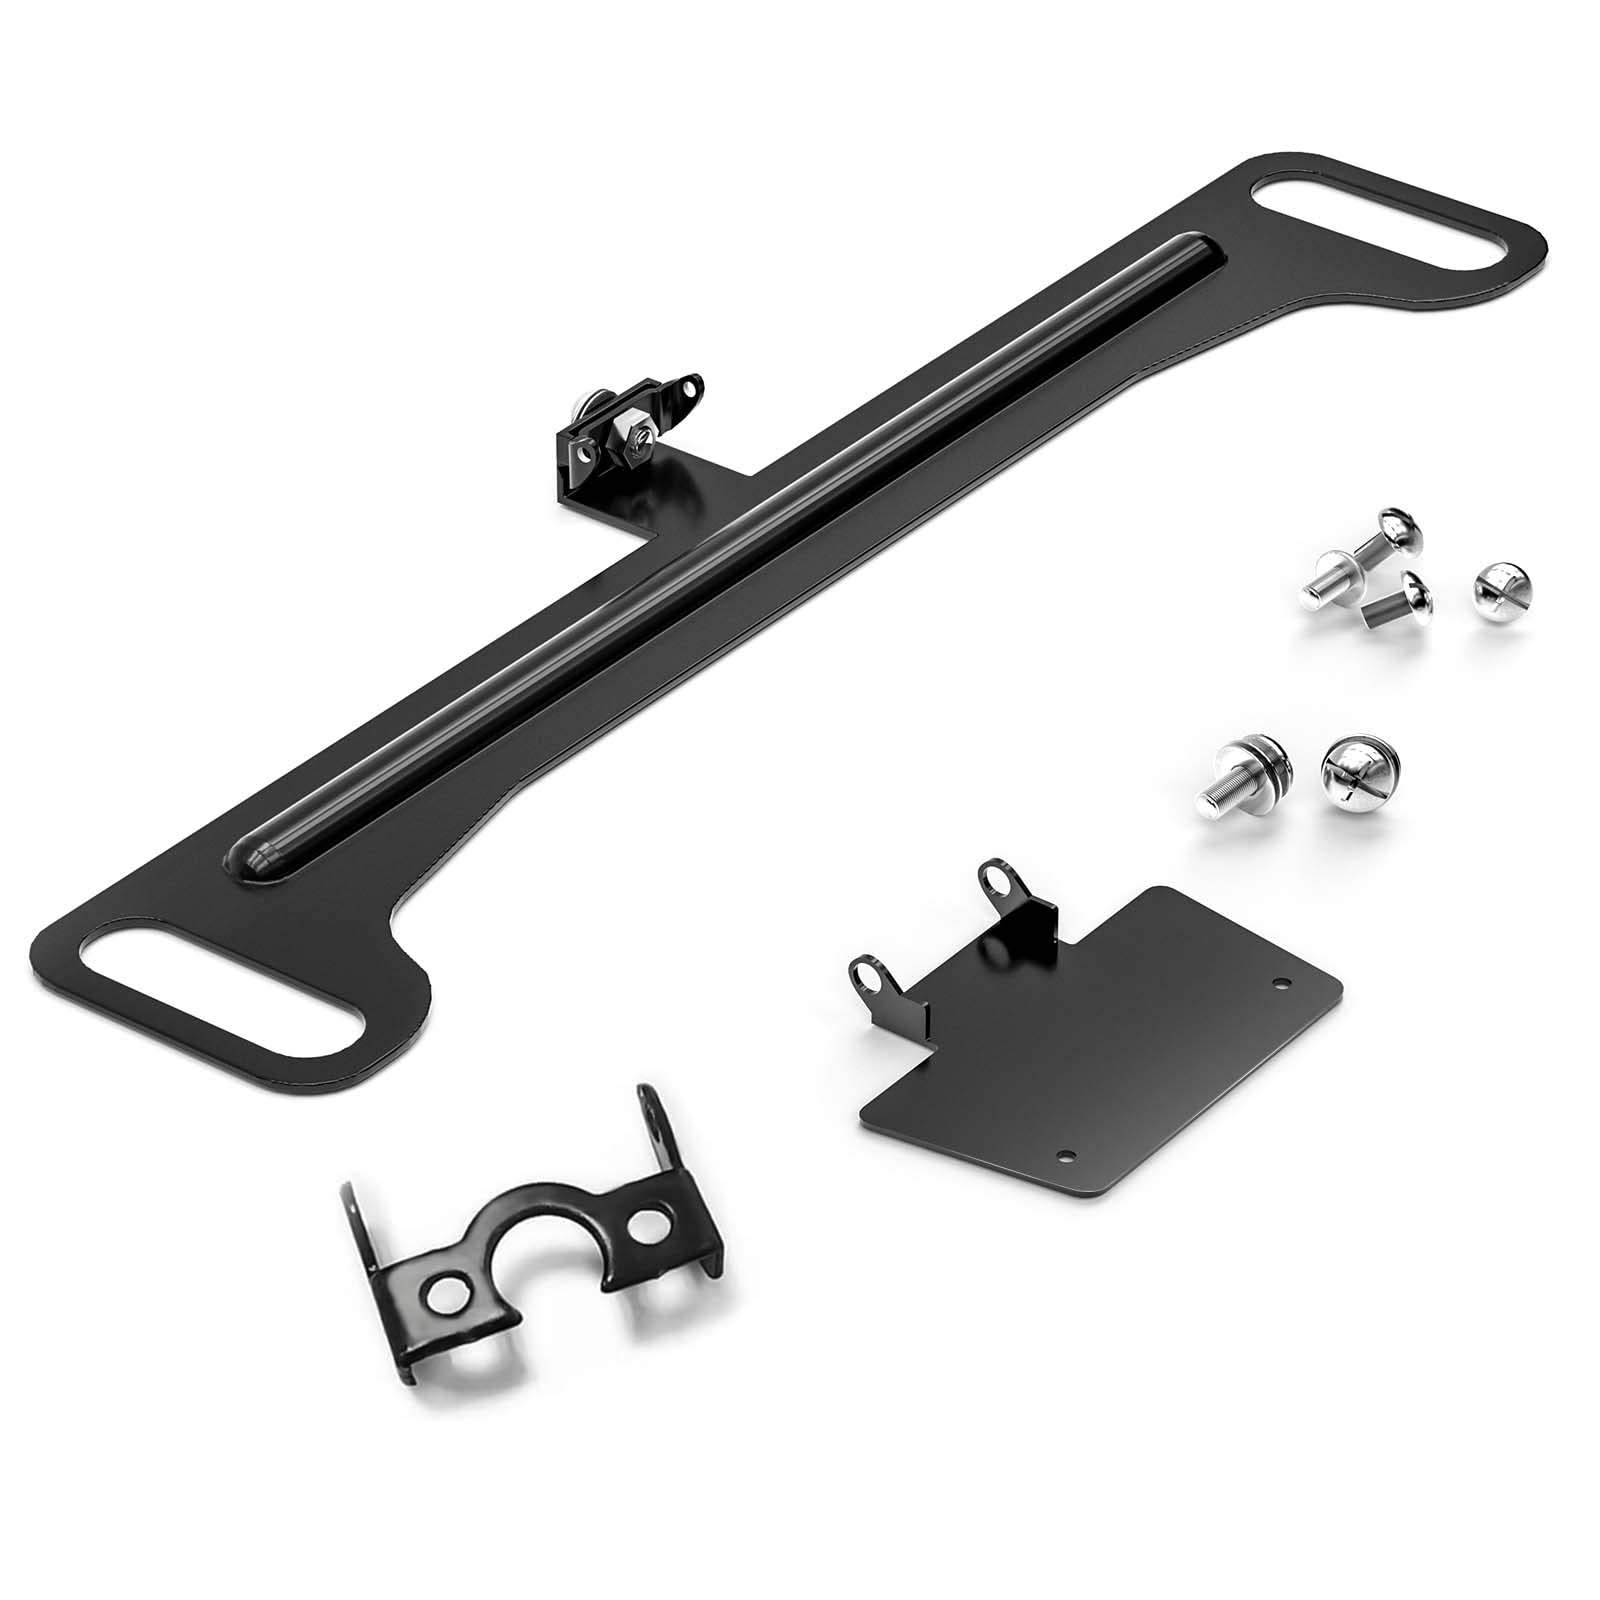 WOLFBOX Reverse Camera Plate Bracket for Easy Backup View Installation Accessory WOLFBOX   